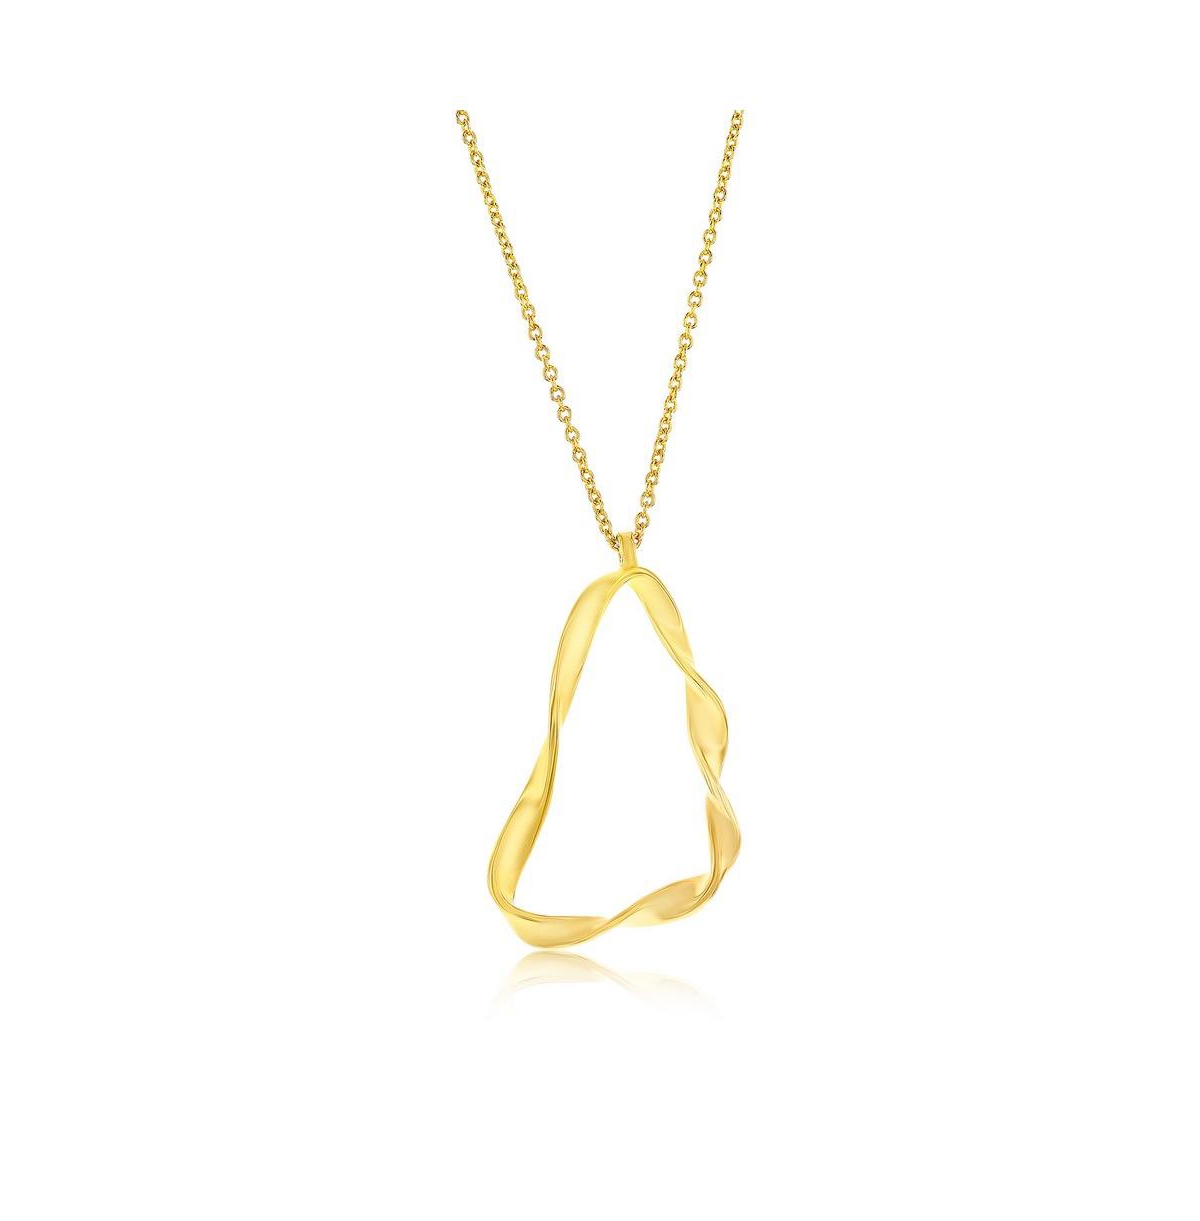 Gold Plated Over Sterling Silver Twisted Triangle Design Necklace - Gold